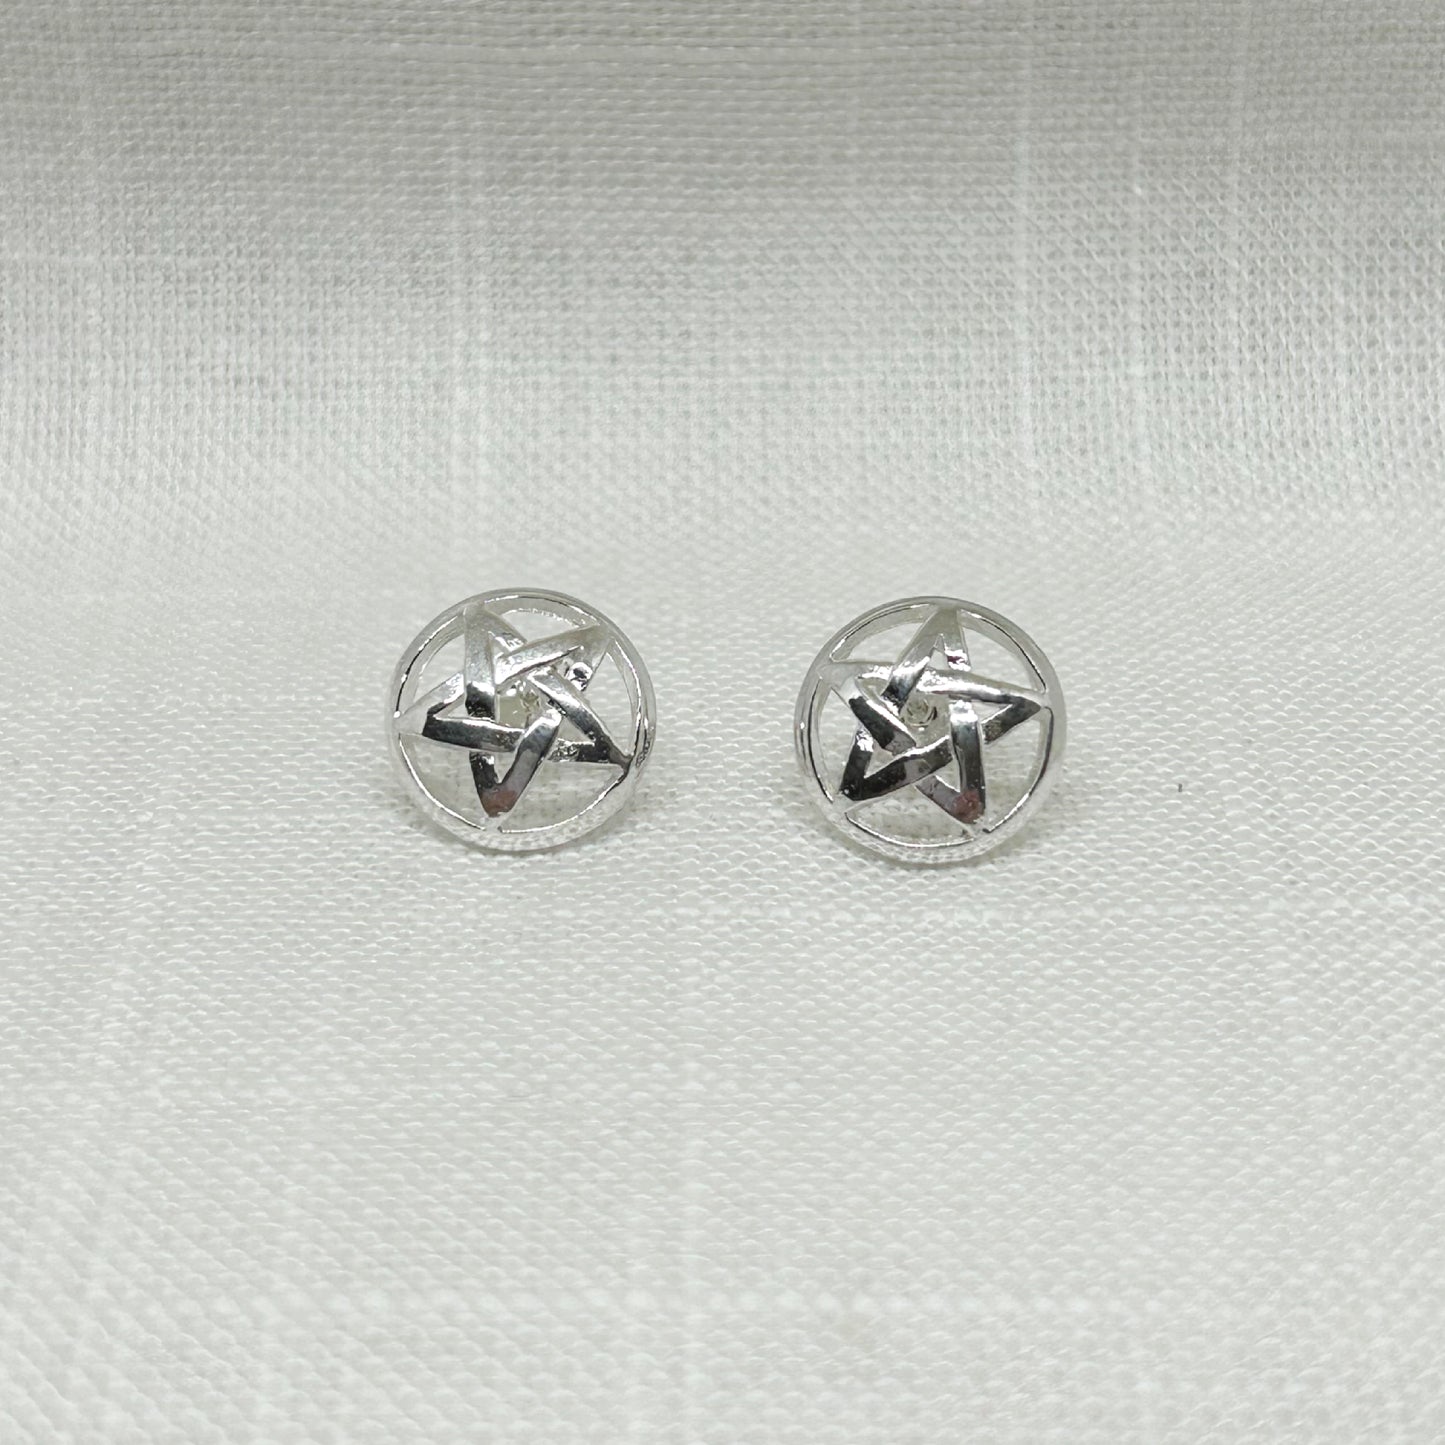 These 925 silver pentacle (a pentagram within a circle) stud post earrings are slightly domed with a high polish. The size of these are 1.1cm in diameter. All jewellery comes gift boxed. Earrings are non returnable due to hygiene laws.